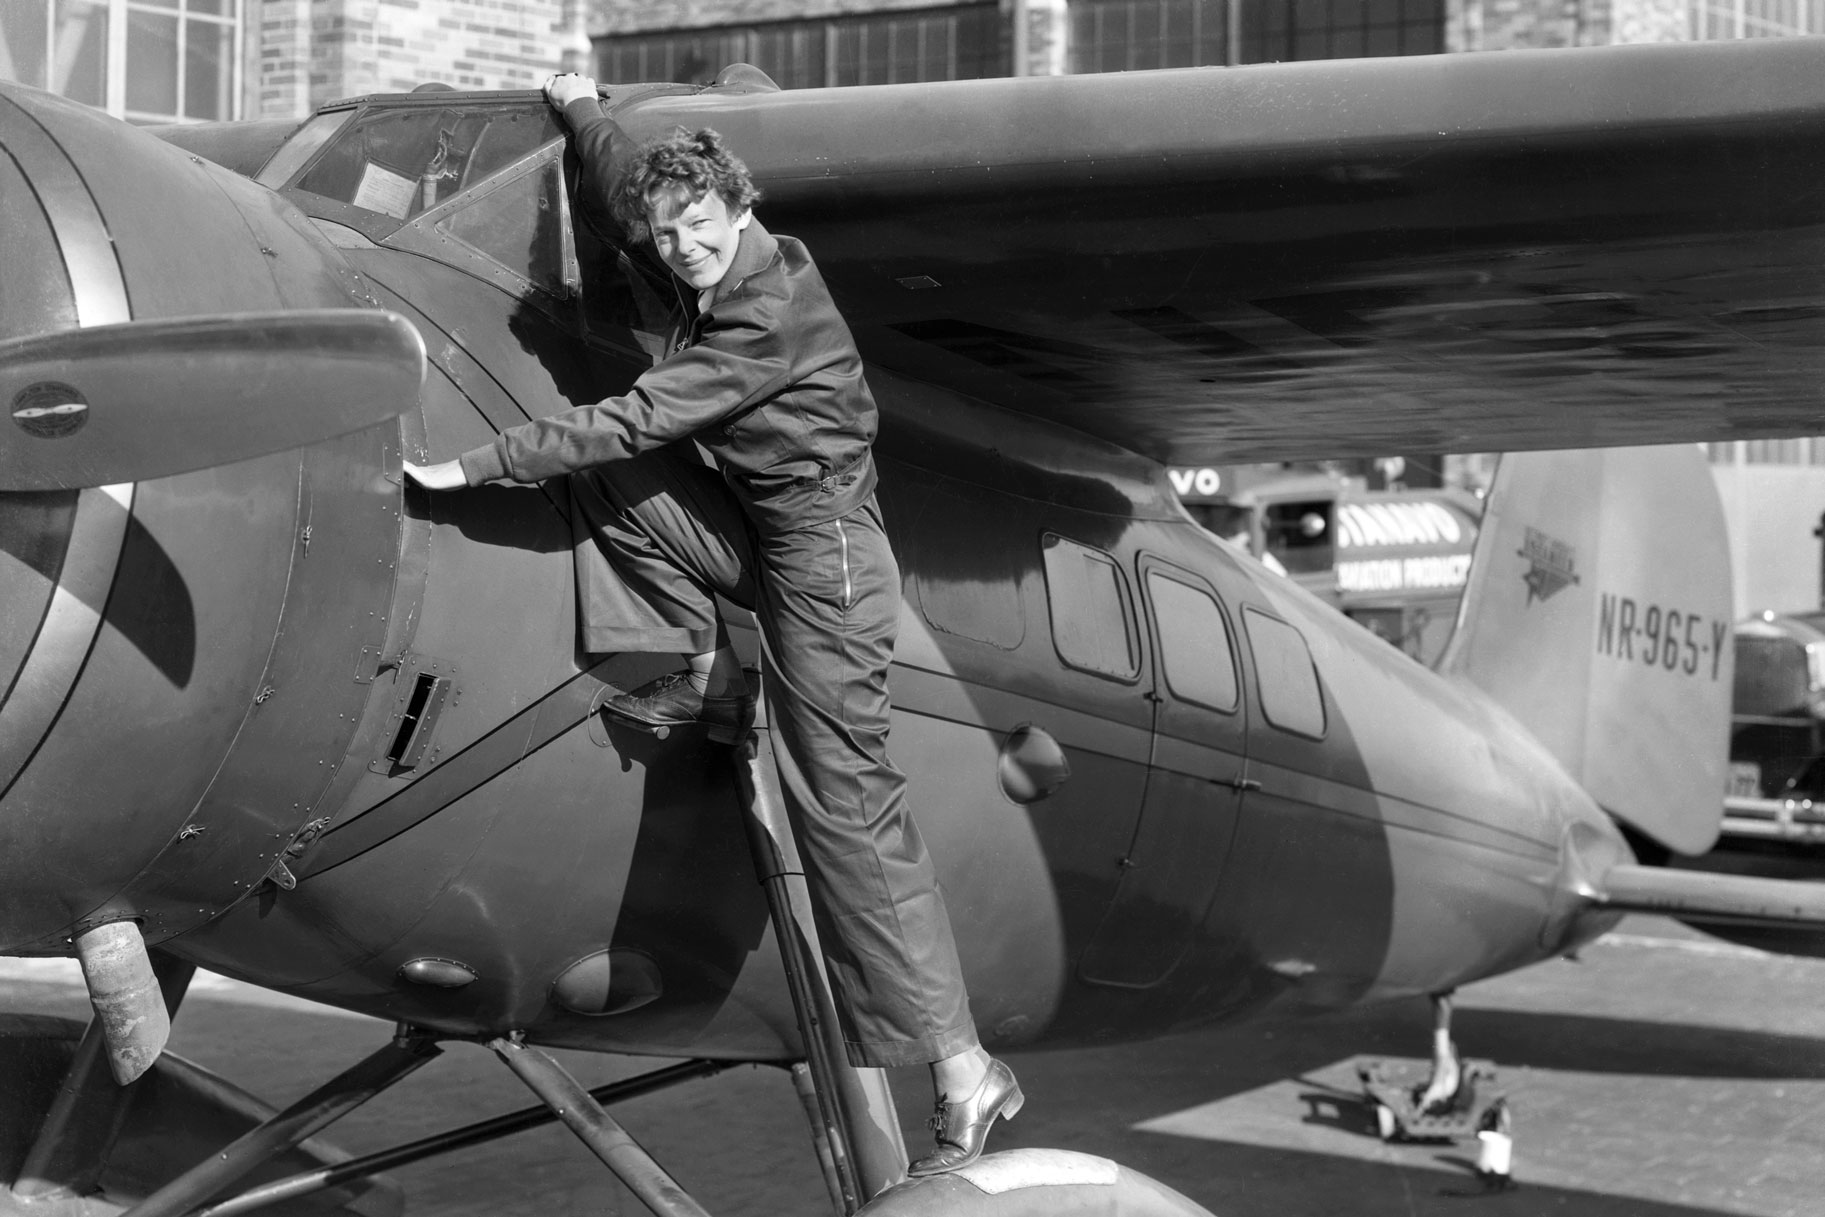 Amelia Earhart going into an airplane